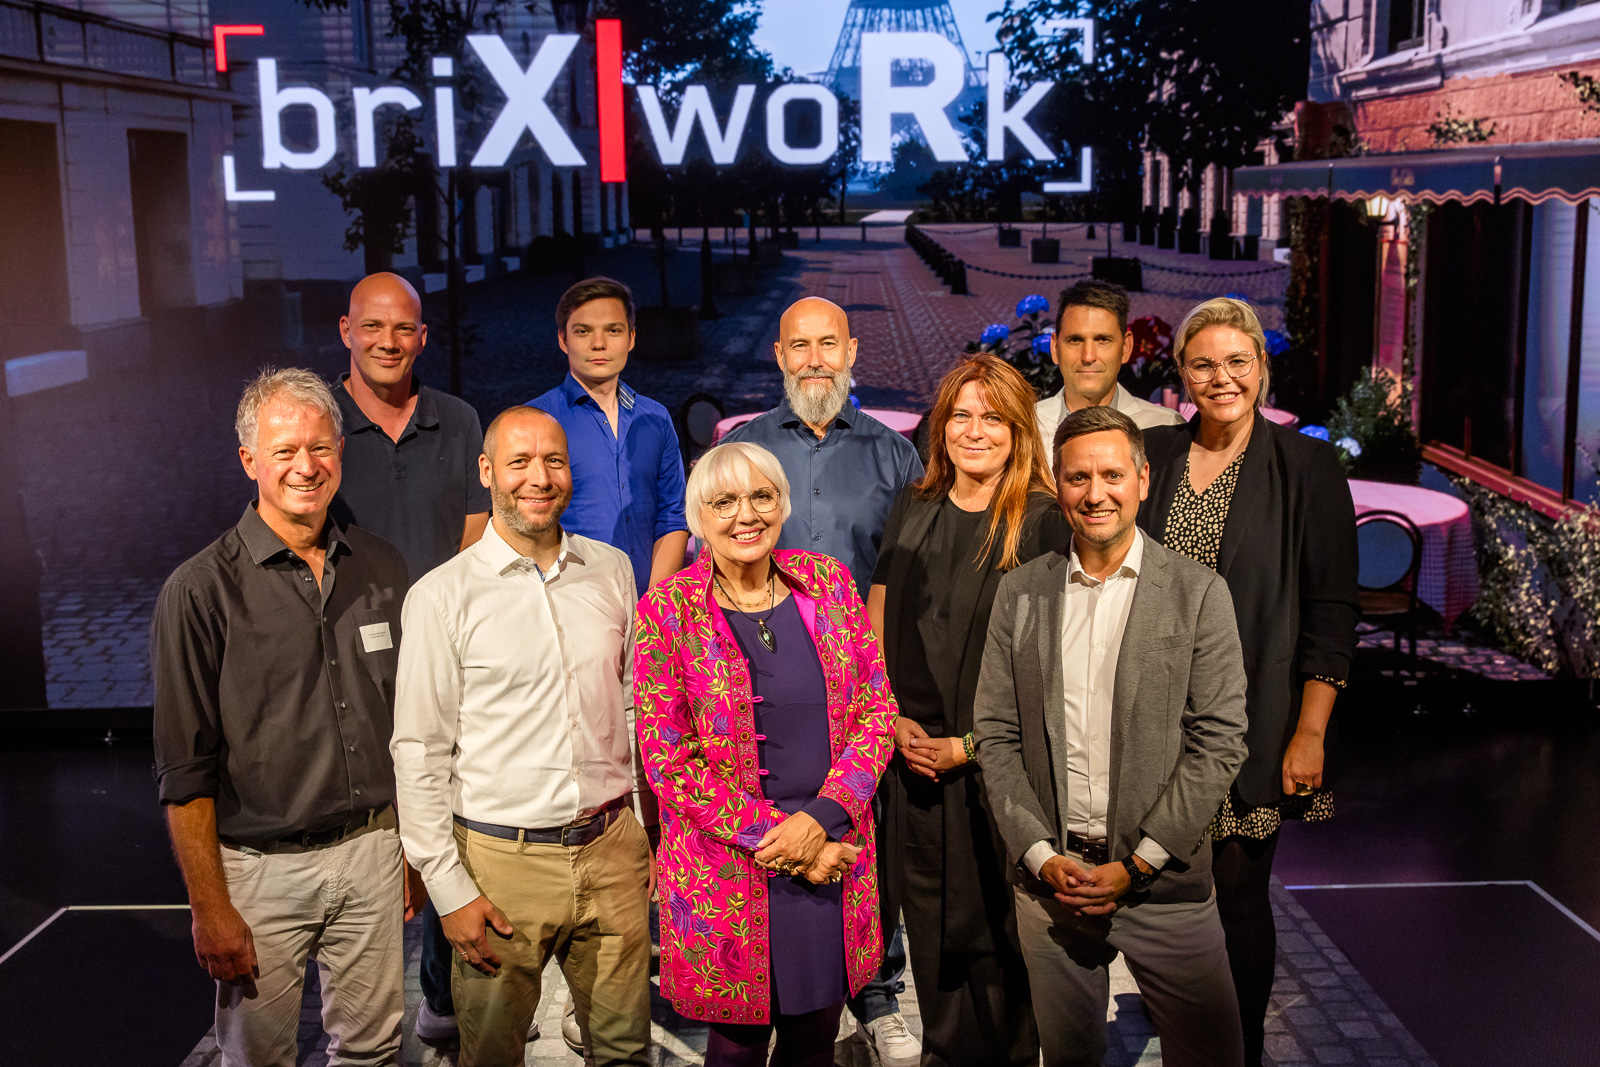 Claudia Roth together with Jens Friedrichs and Hardy Steinweg and a group photo from the presentation at briX|woRk.studio